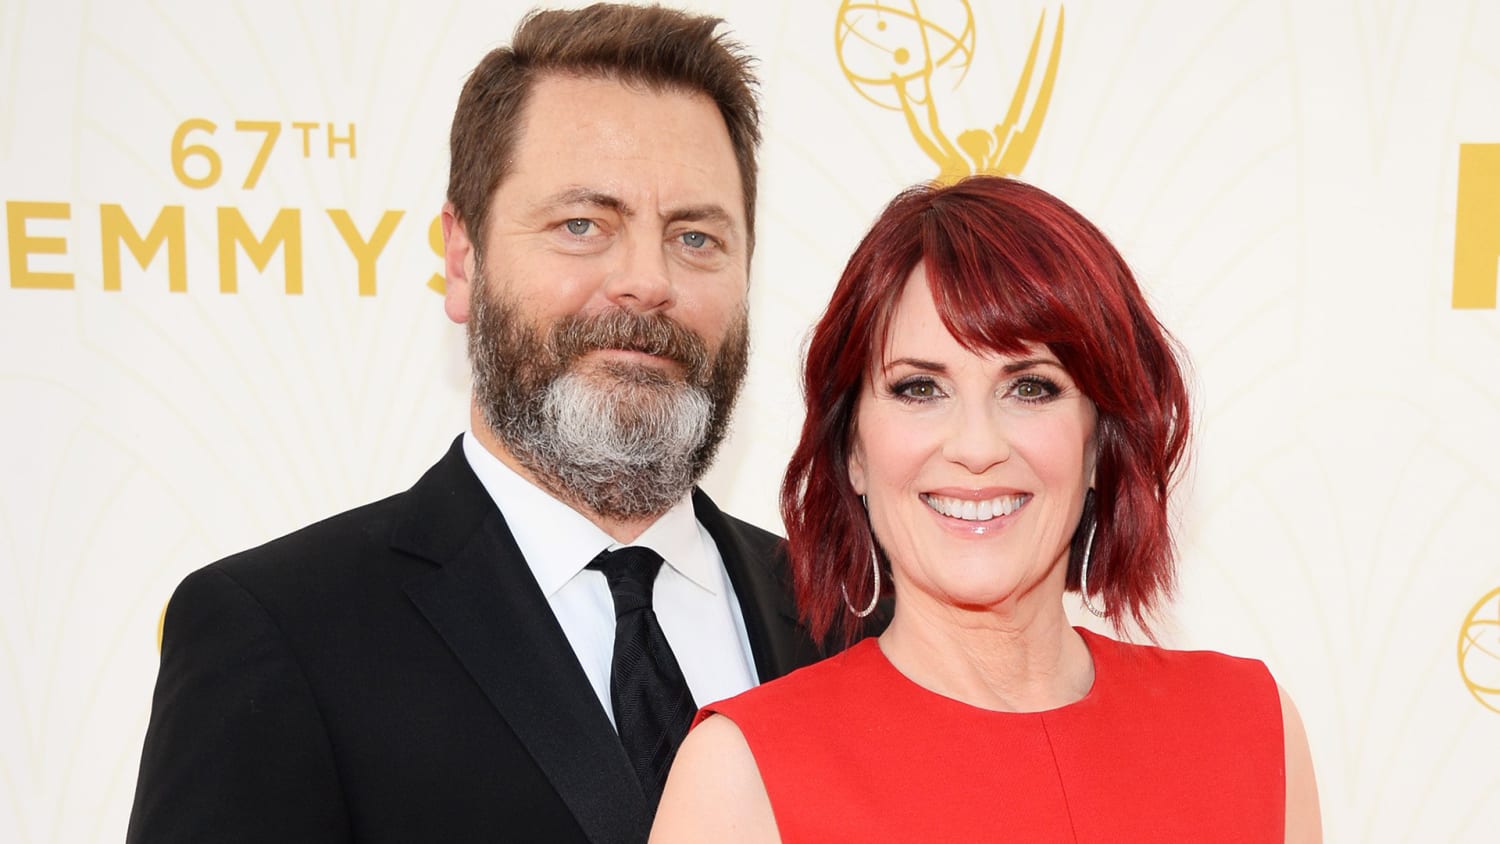 Is Nick Offerman Dating with Megan Mullally?